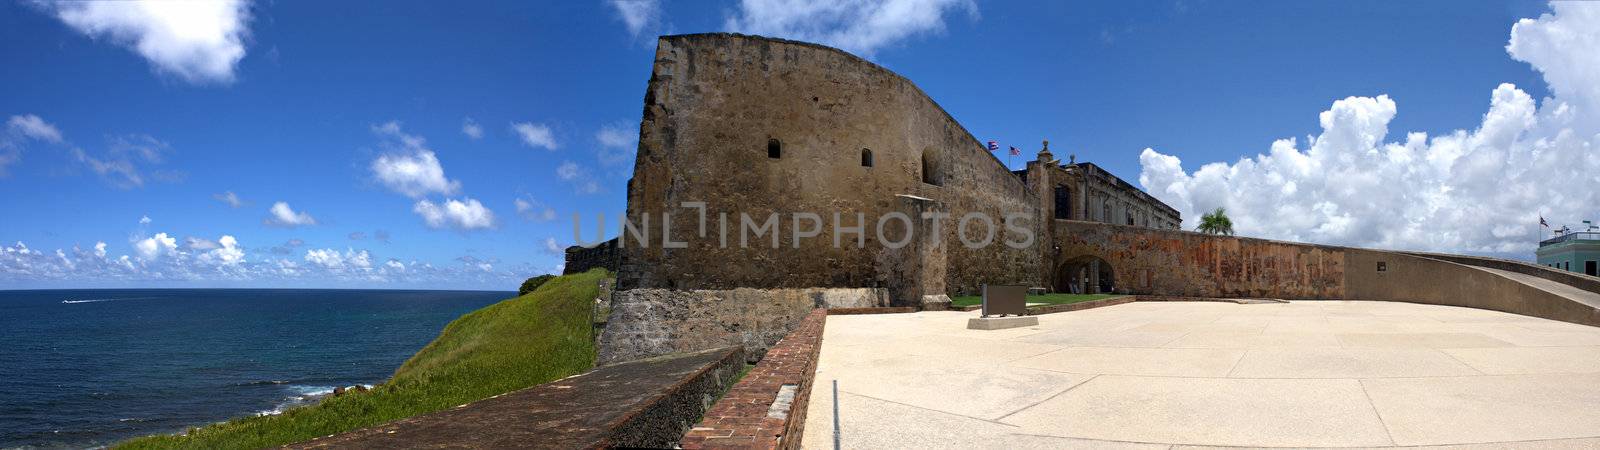 A wide angle panoramic view of the historic San Cristobal fortification located in Old San Juan Puerto Rico.